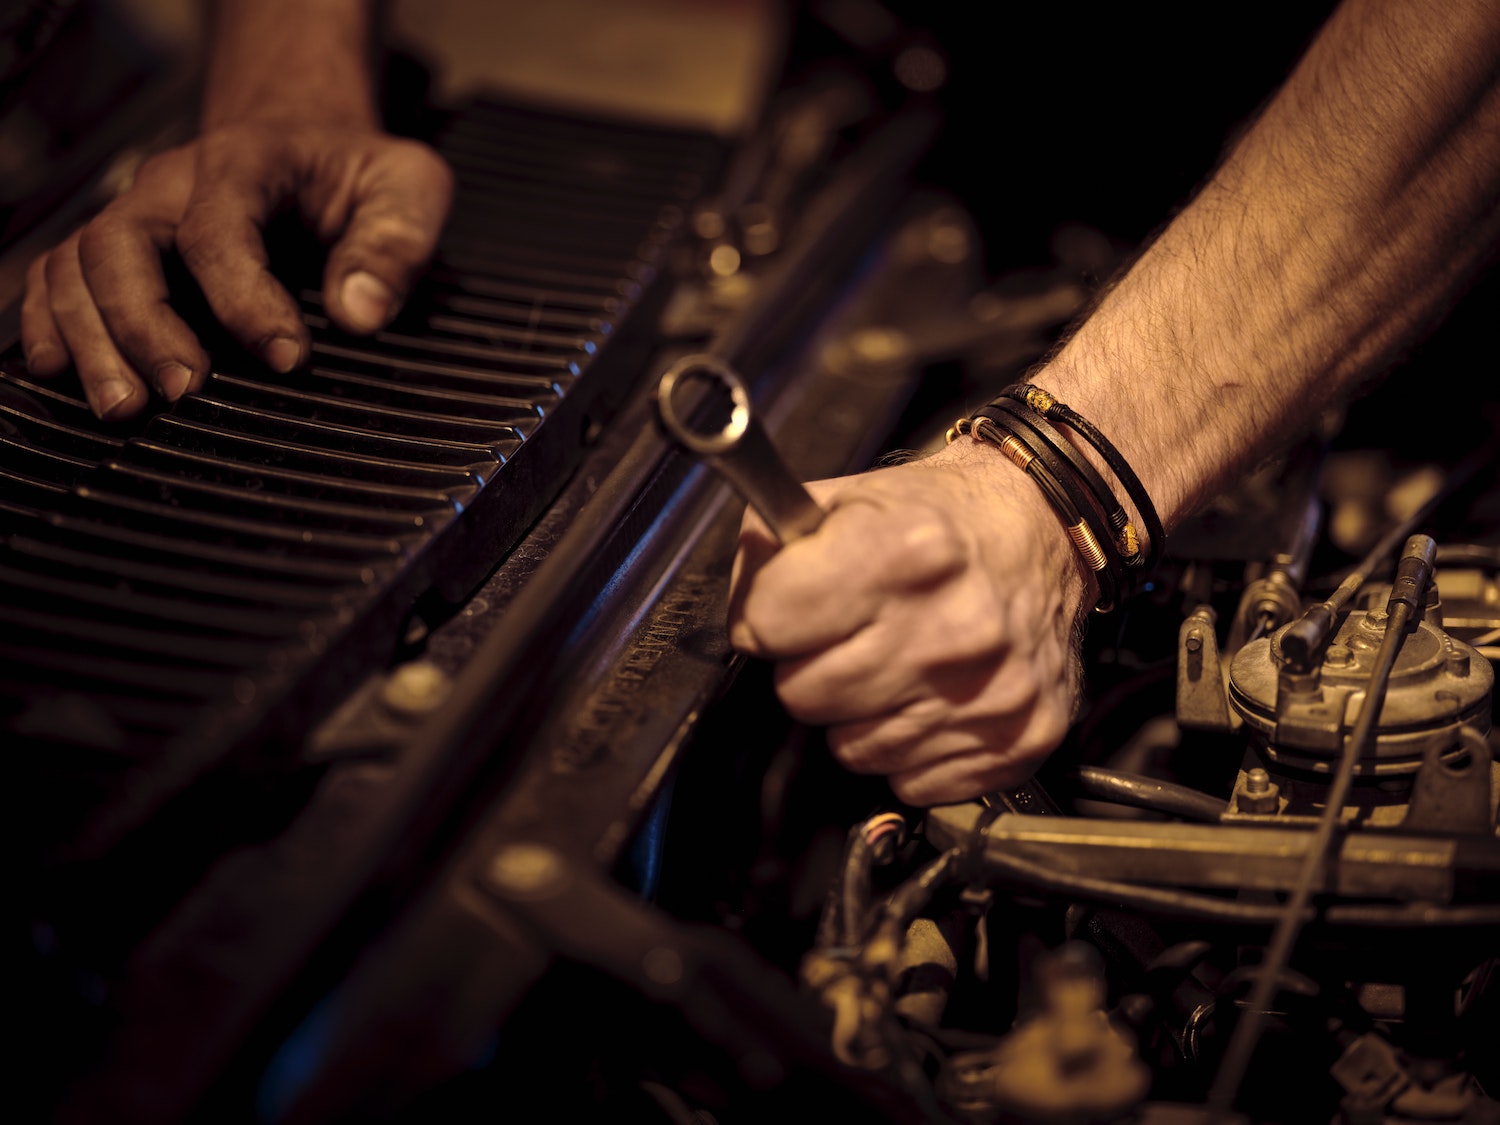 Closeup of a mechanic's hand holding a wrench in an engine bay, applying several lb-ft of torque to a stuck bolt.